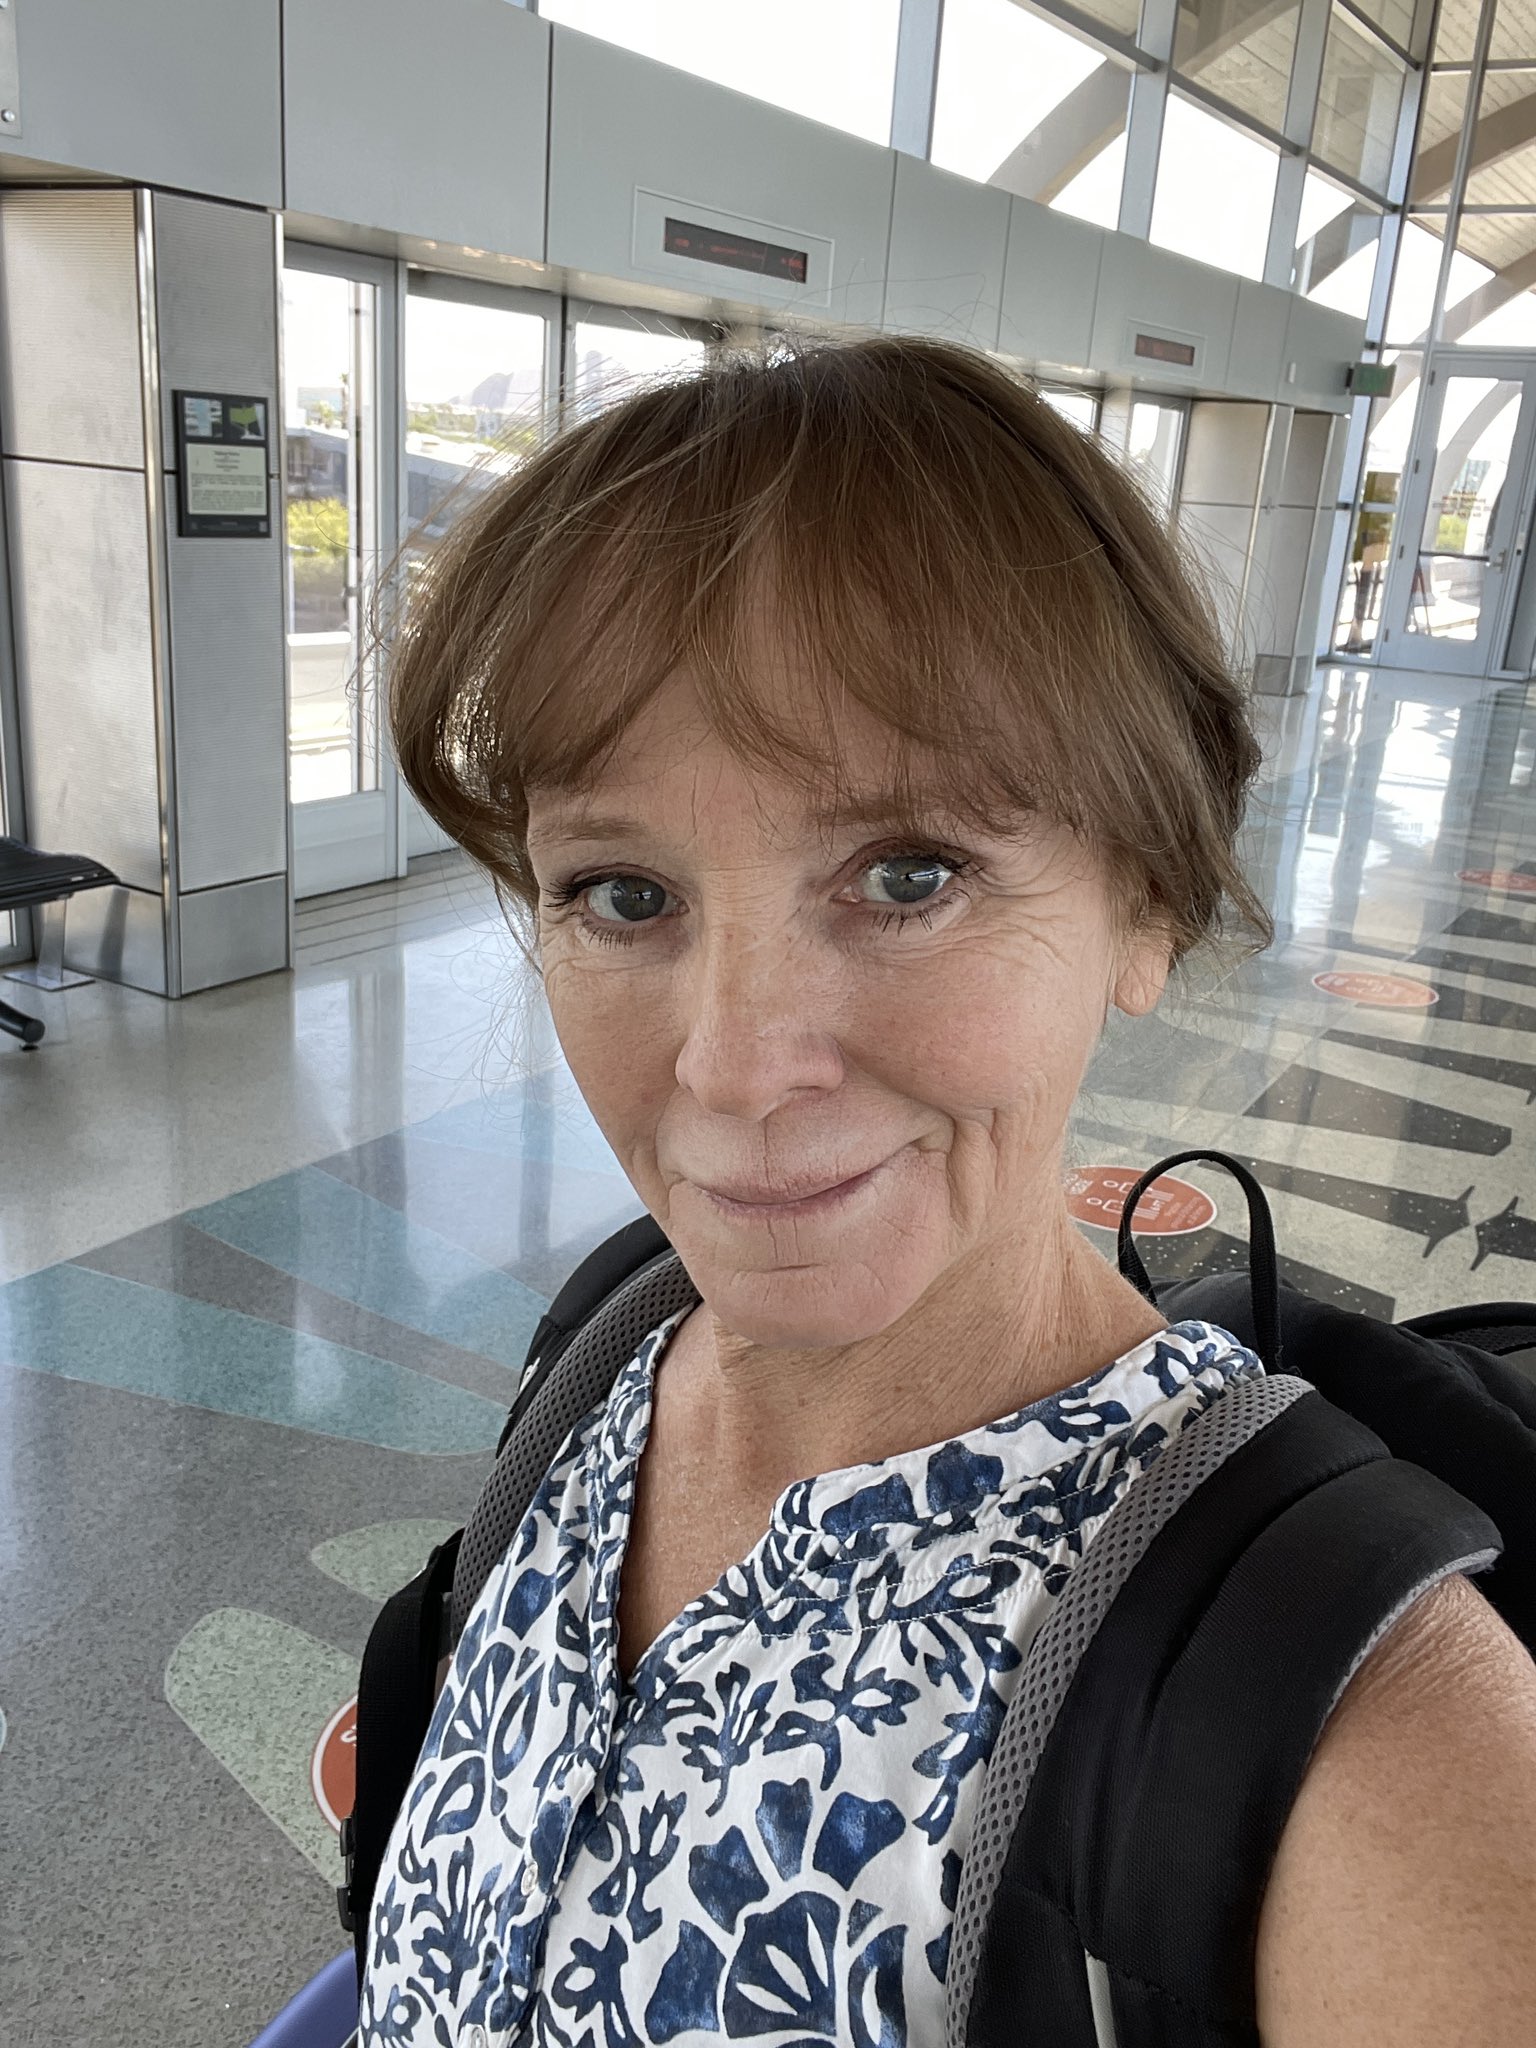 Cyndi Sinclair On Twitter On My Way To Miami To Meet New Friends